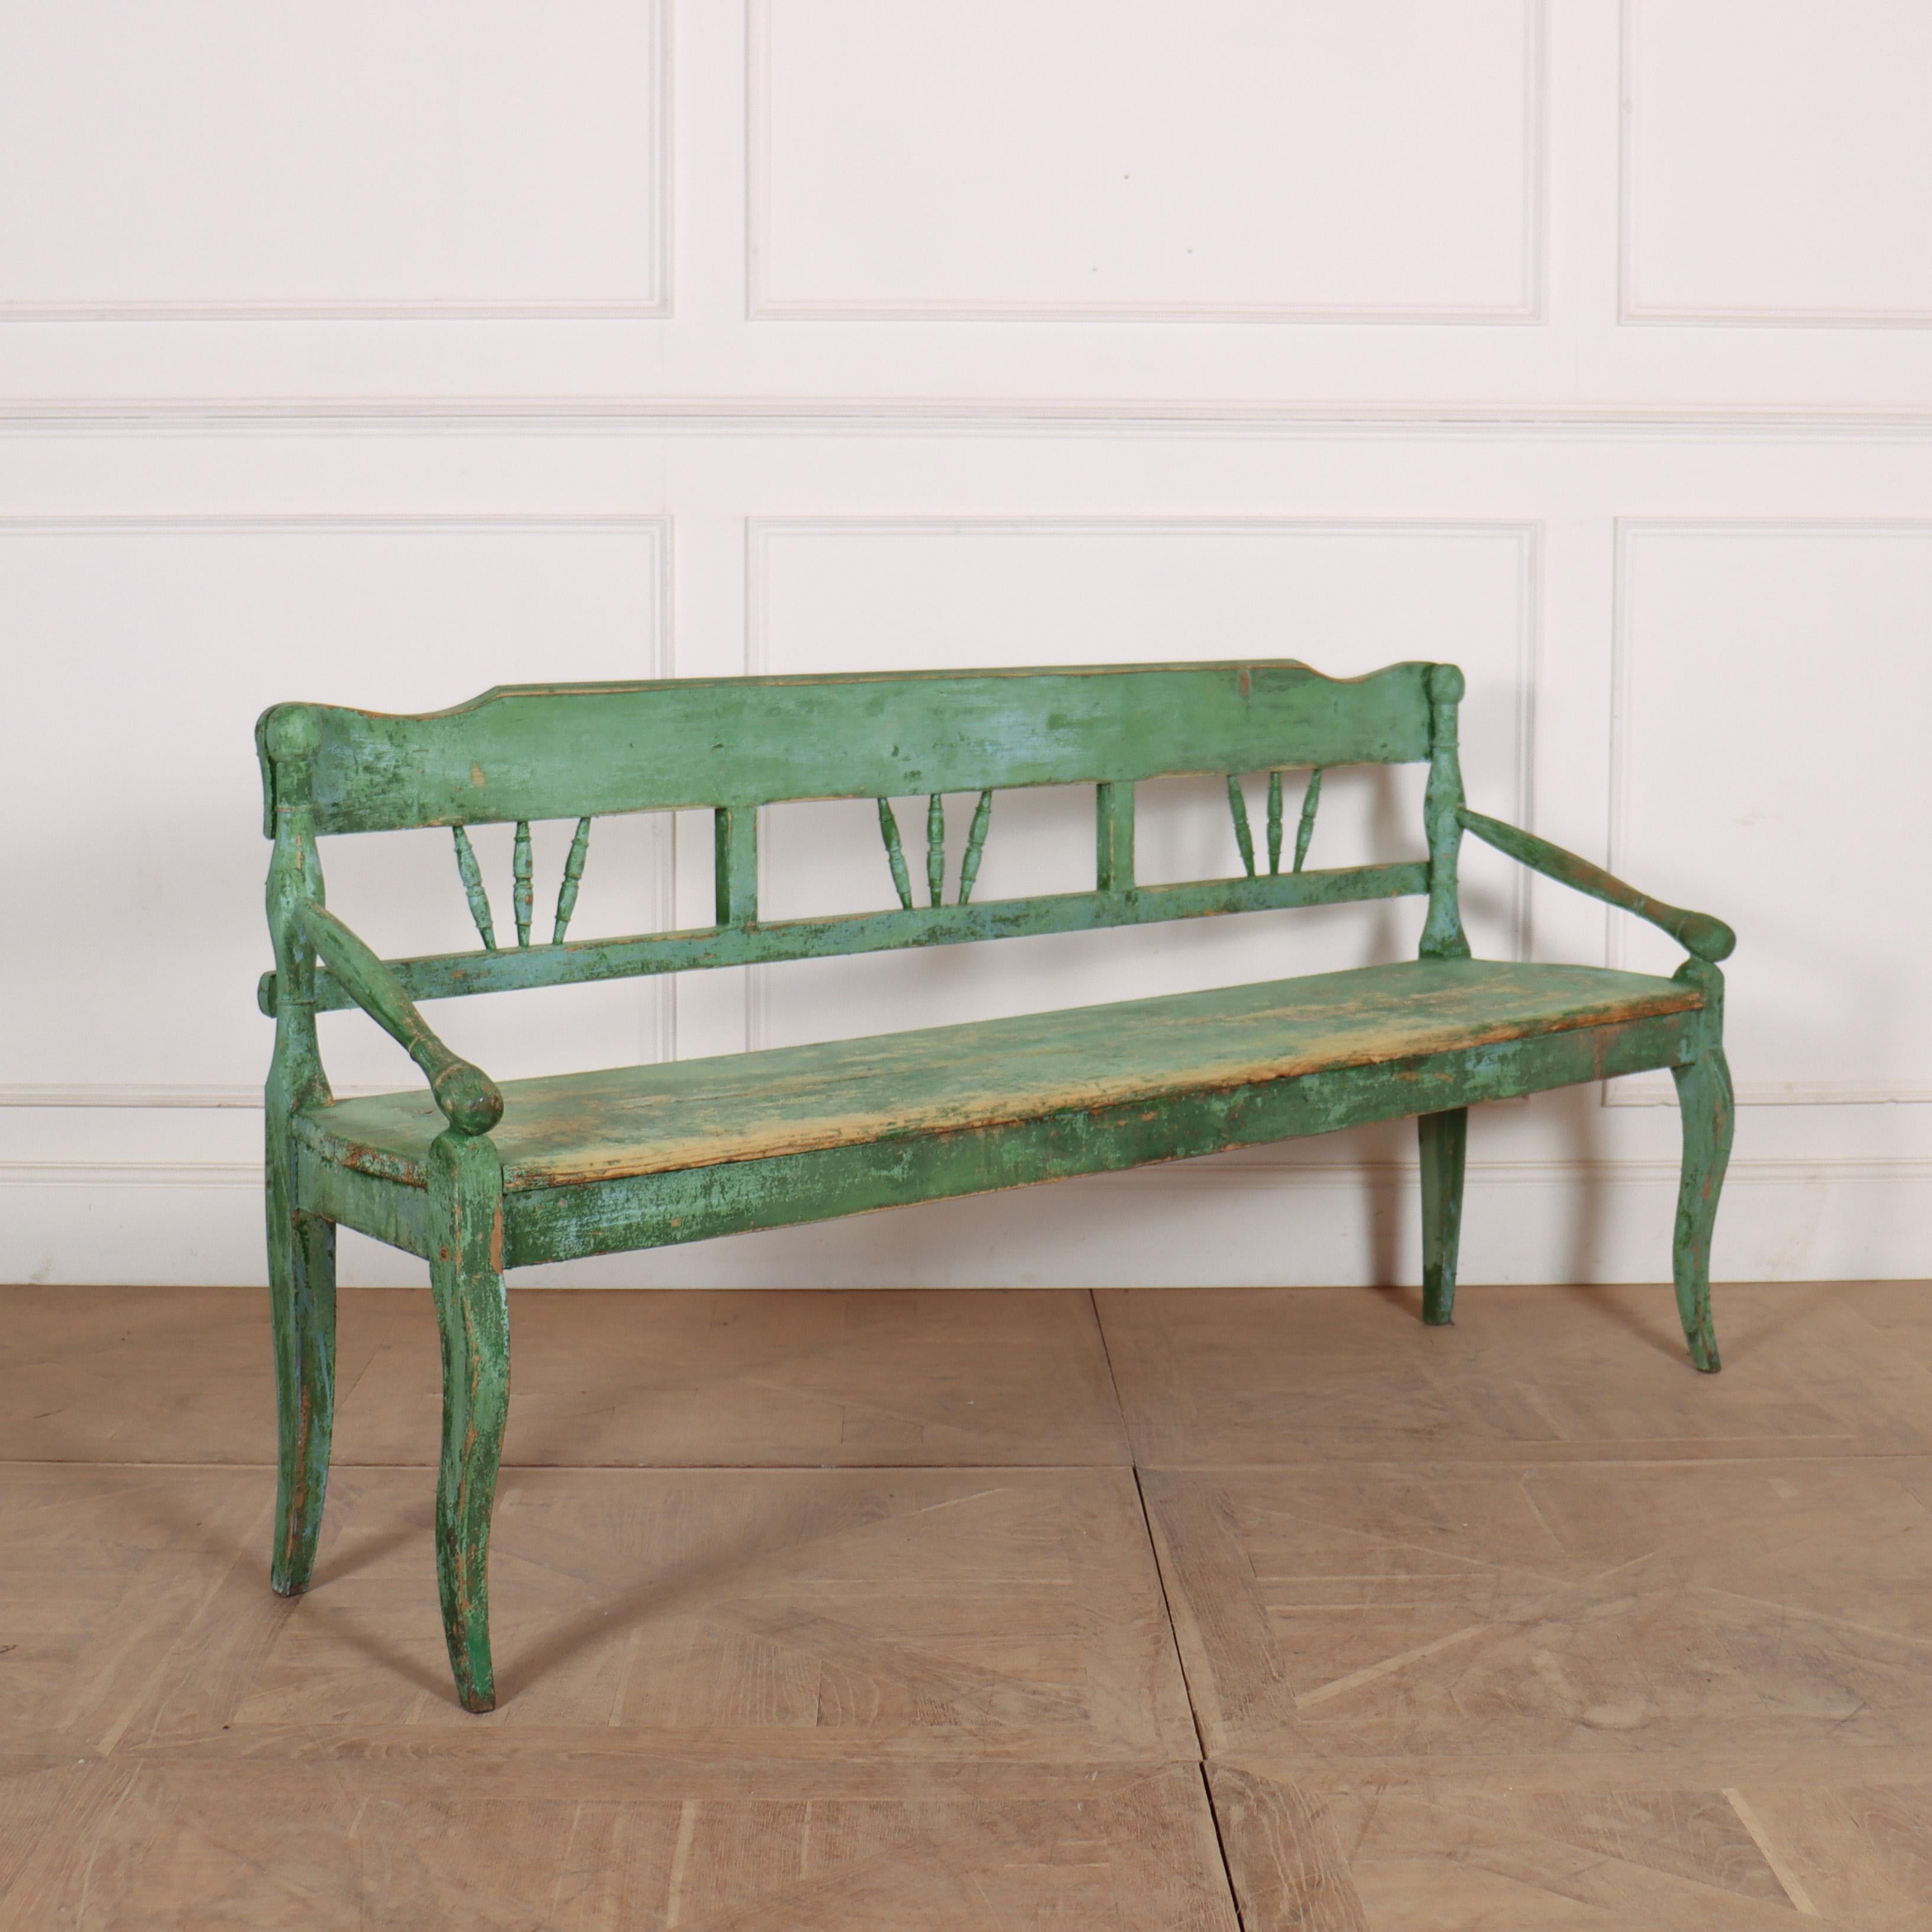 Unusual 19th C Austrian pine bench with original paint finish and saber legs. 1840.

Seat height is 19